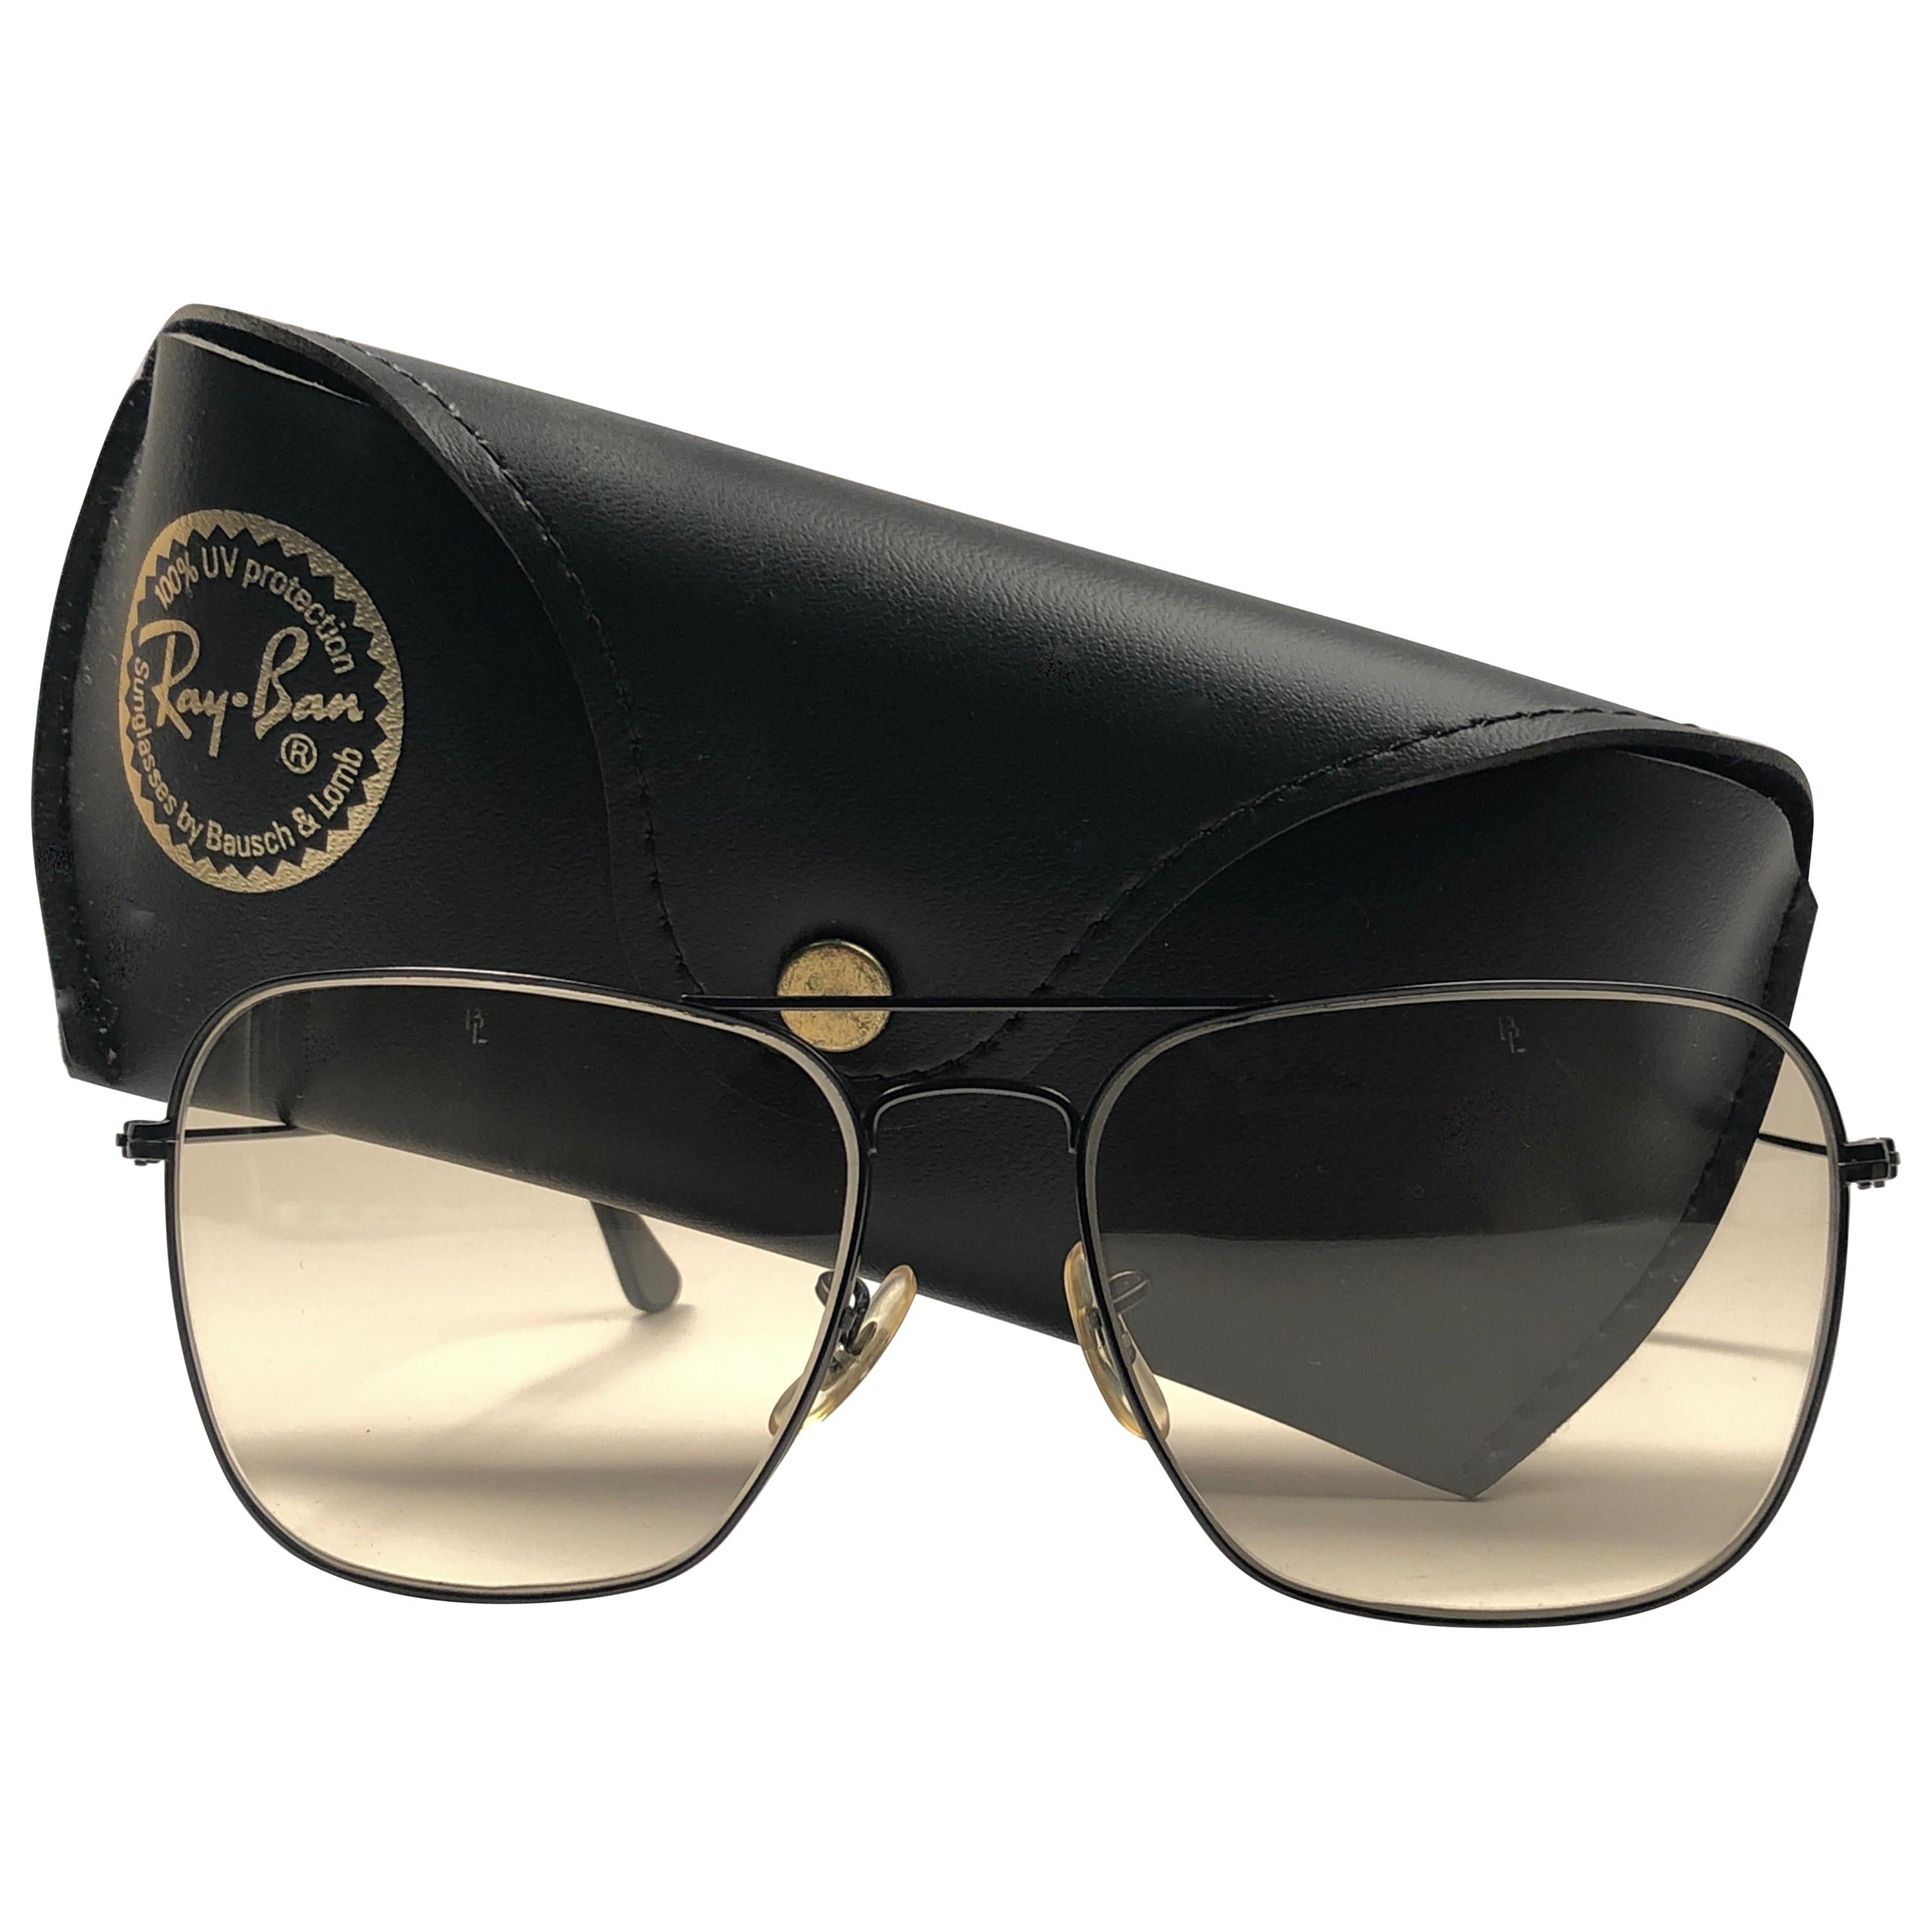 ray ban changeable lenses